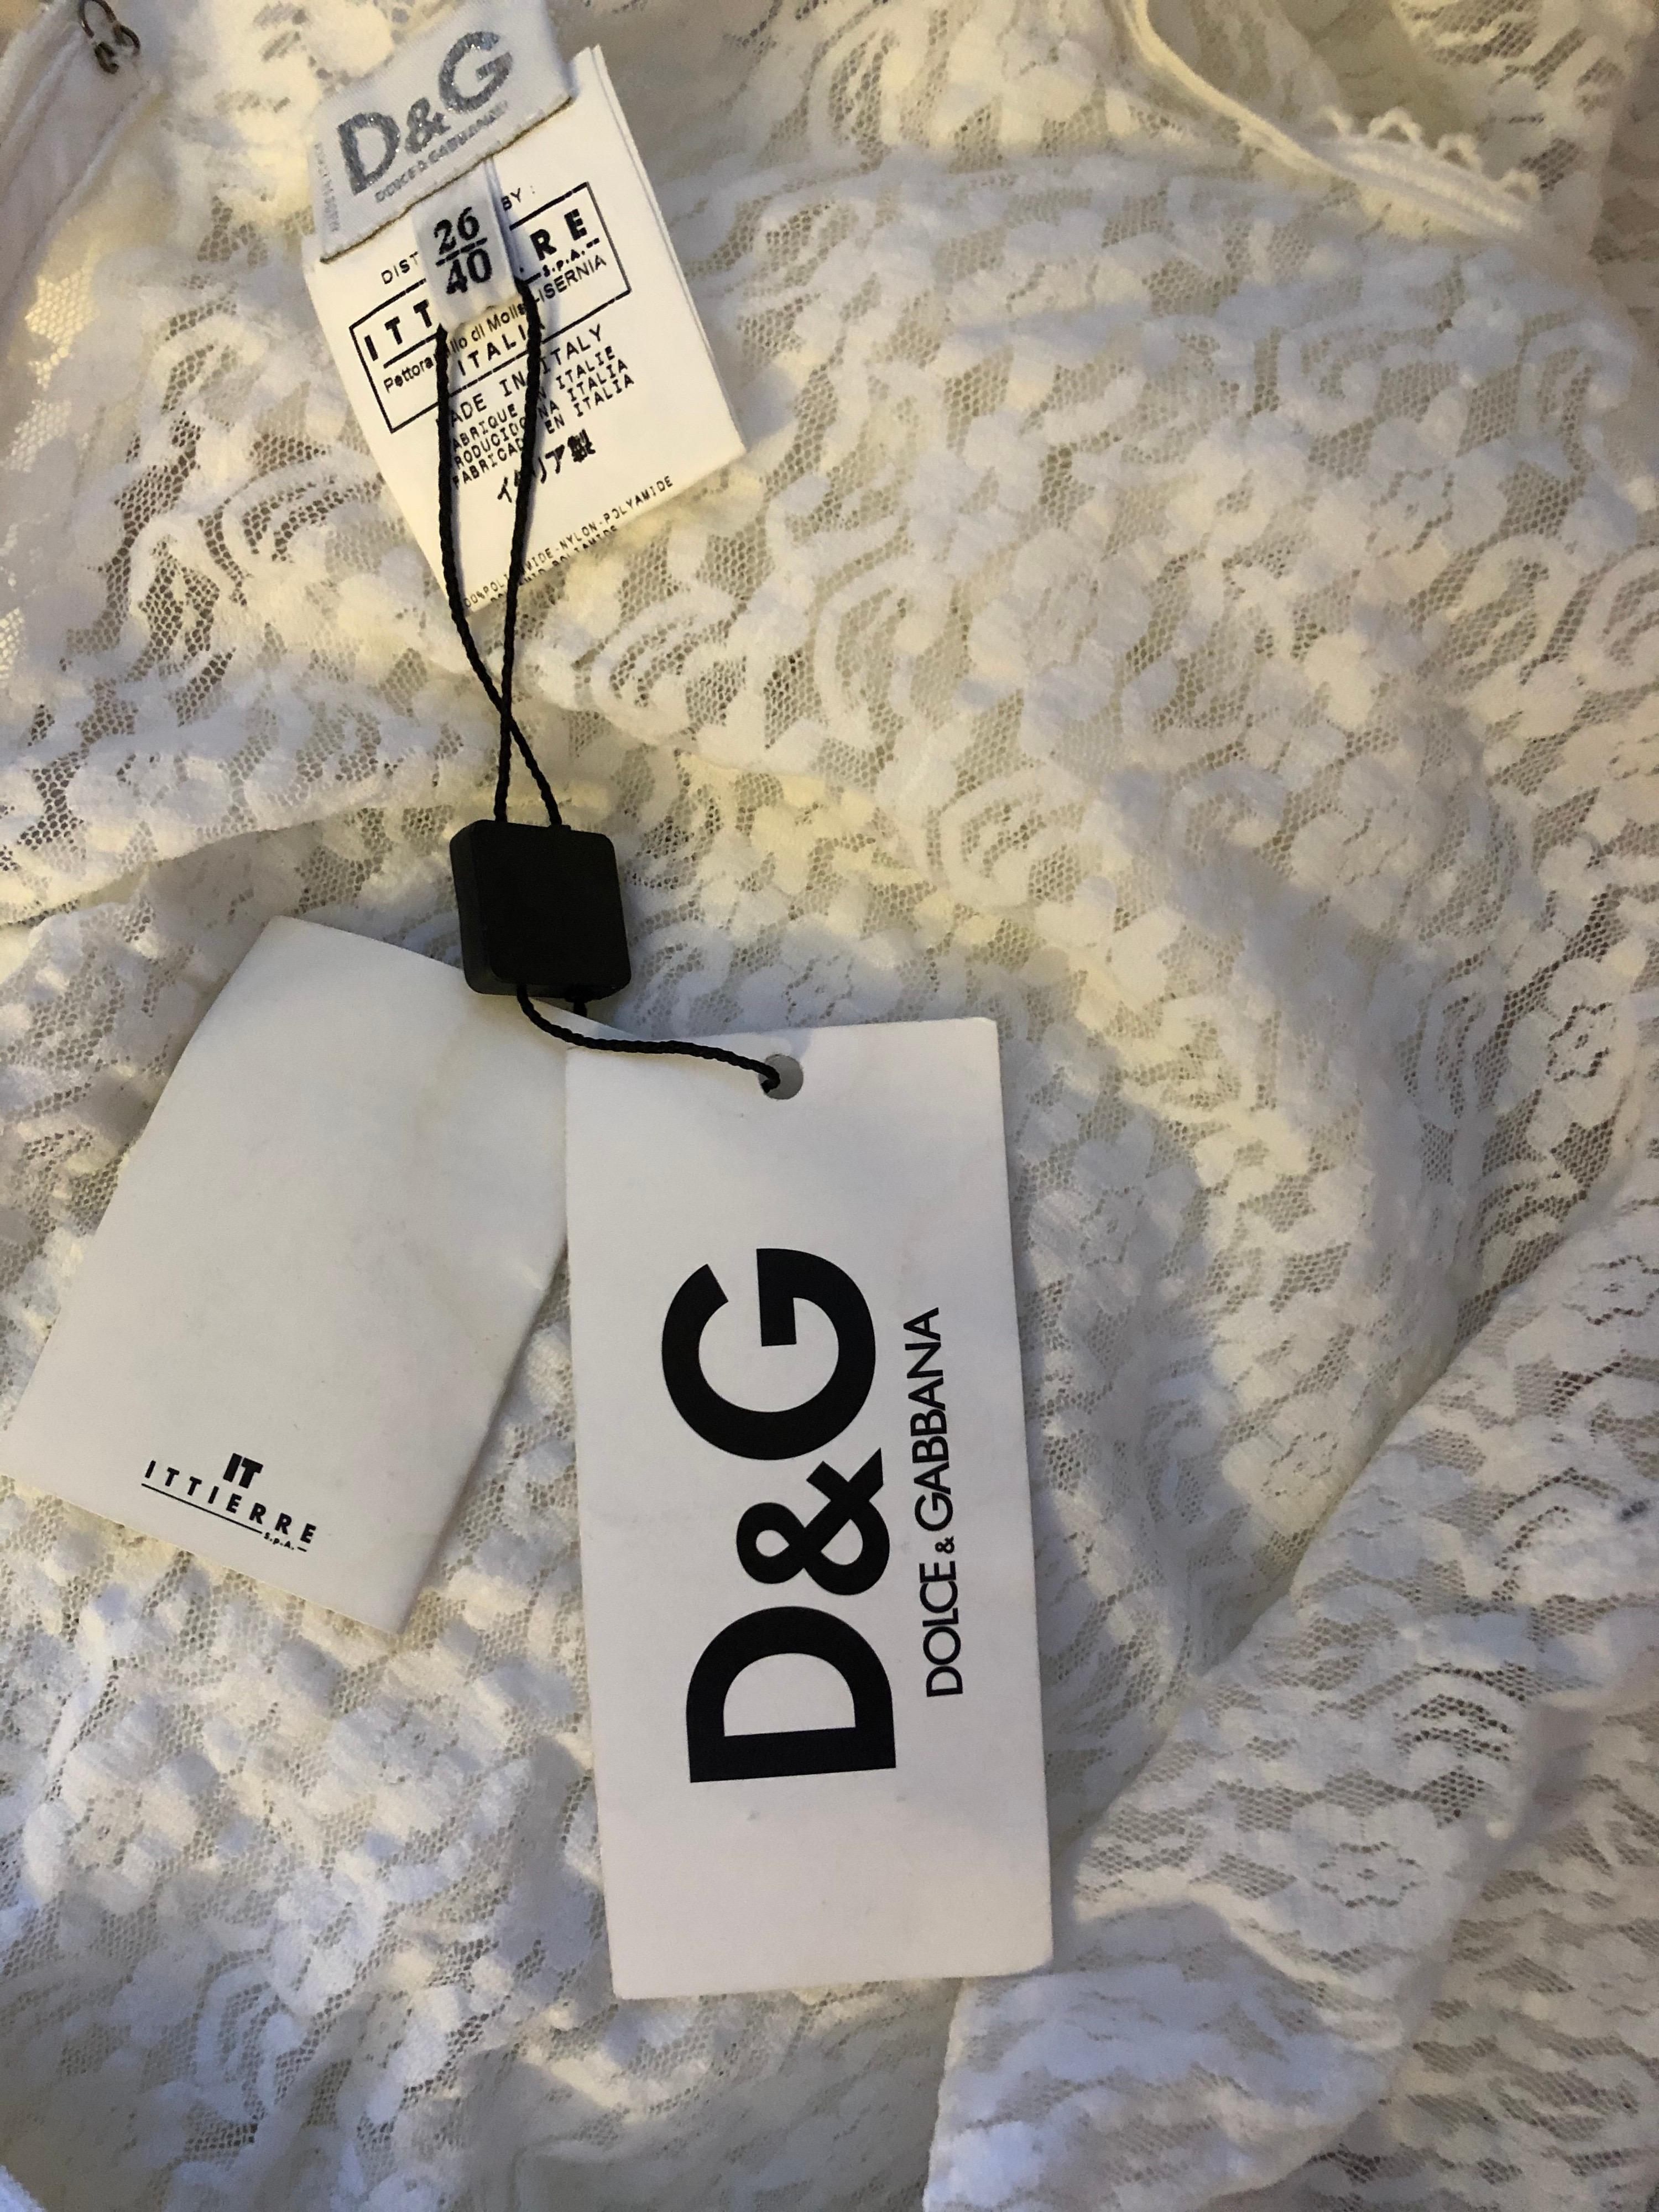 Gray NWT D&G by Dolce & Gabbana S/S 2006 Runway Sheer Lace White Dress For Sale